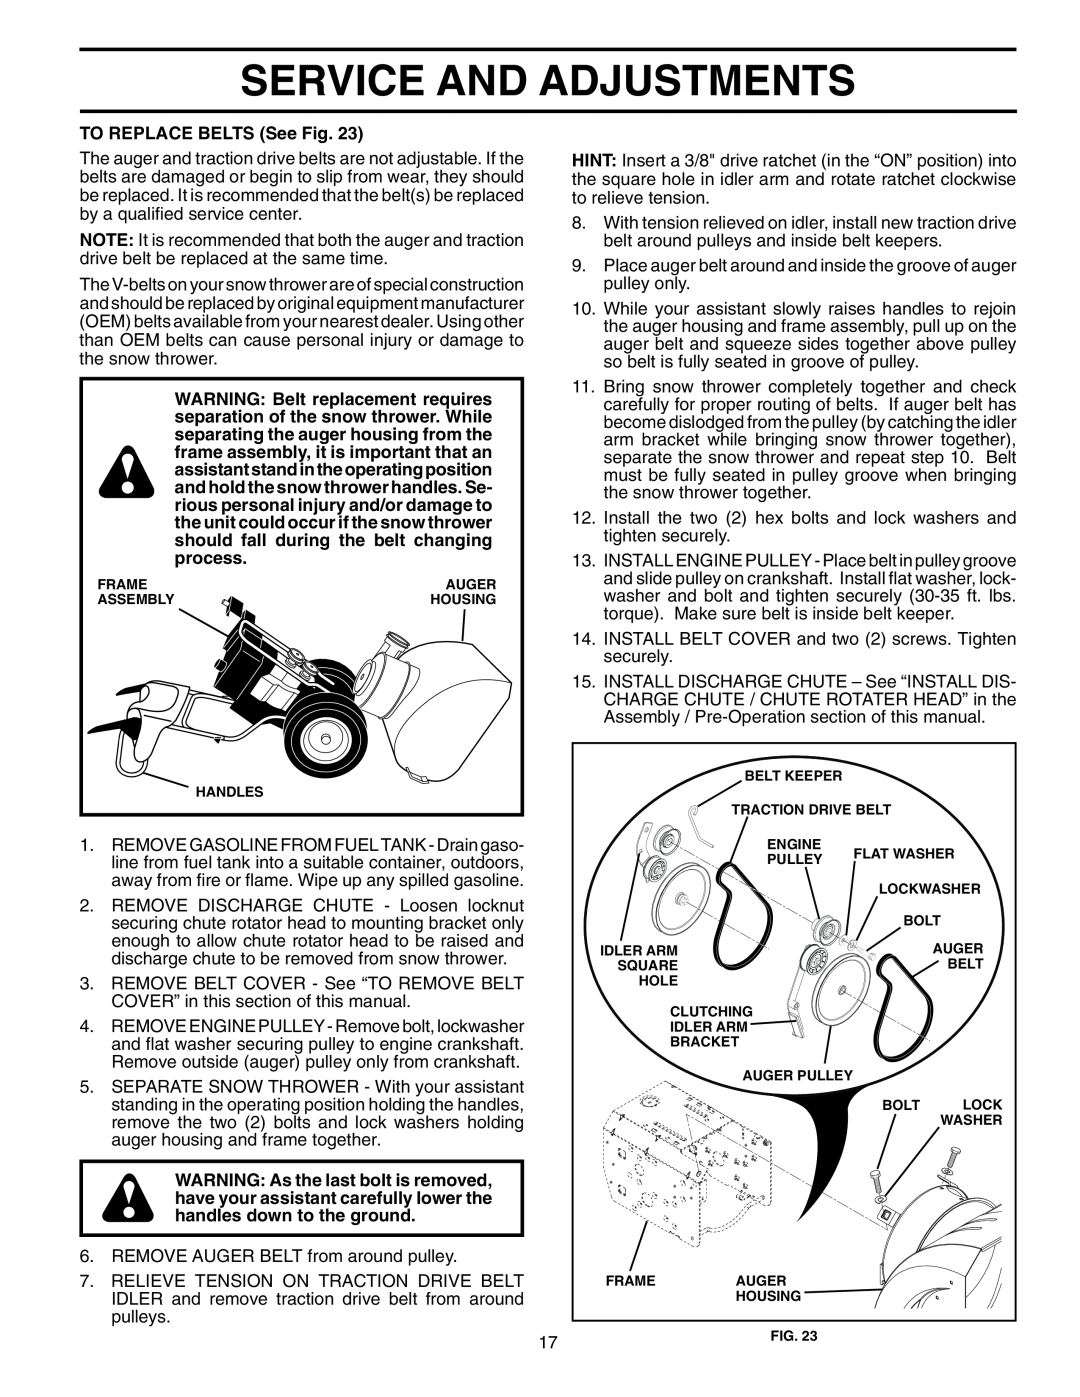 Husqvarna 10527SBE owner manual Service And Adjustments, TO REPLACE BELTS See Fig 